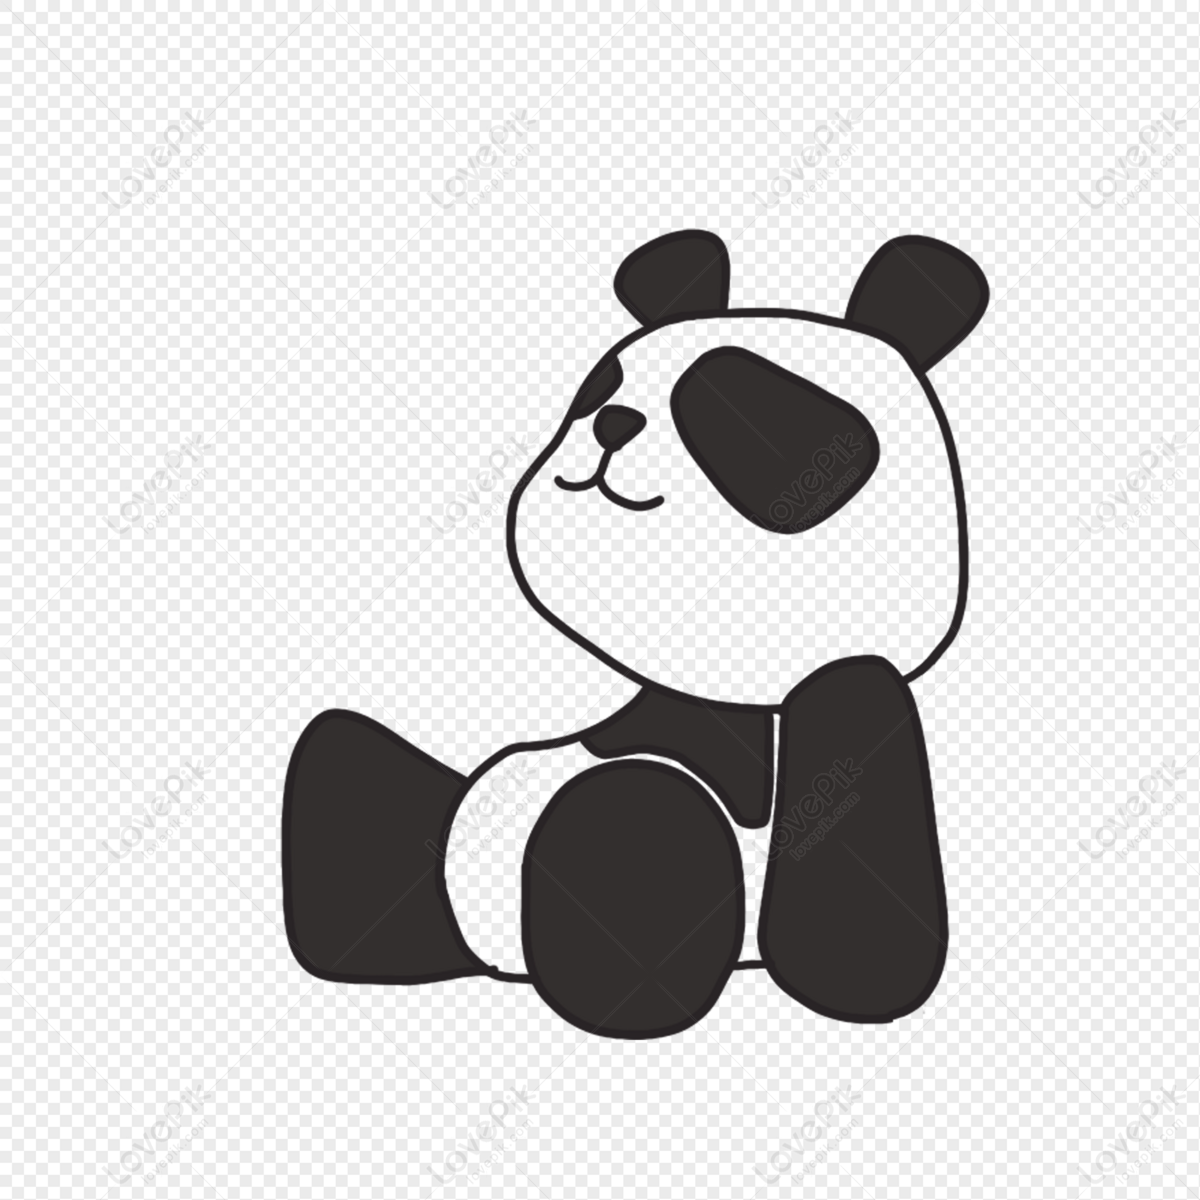 Stick Figure Of Panda Sitting PNG Free Download And Clipart Image ...